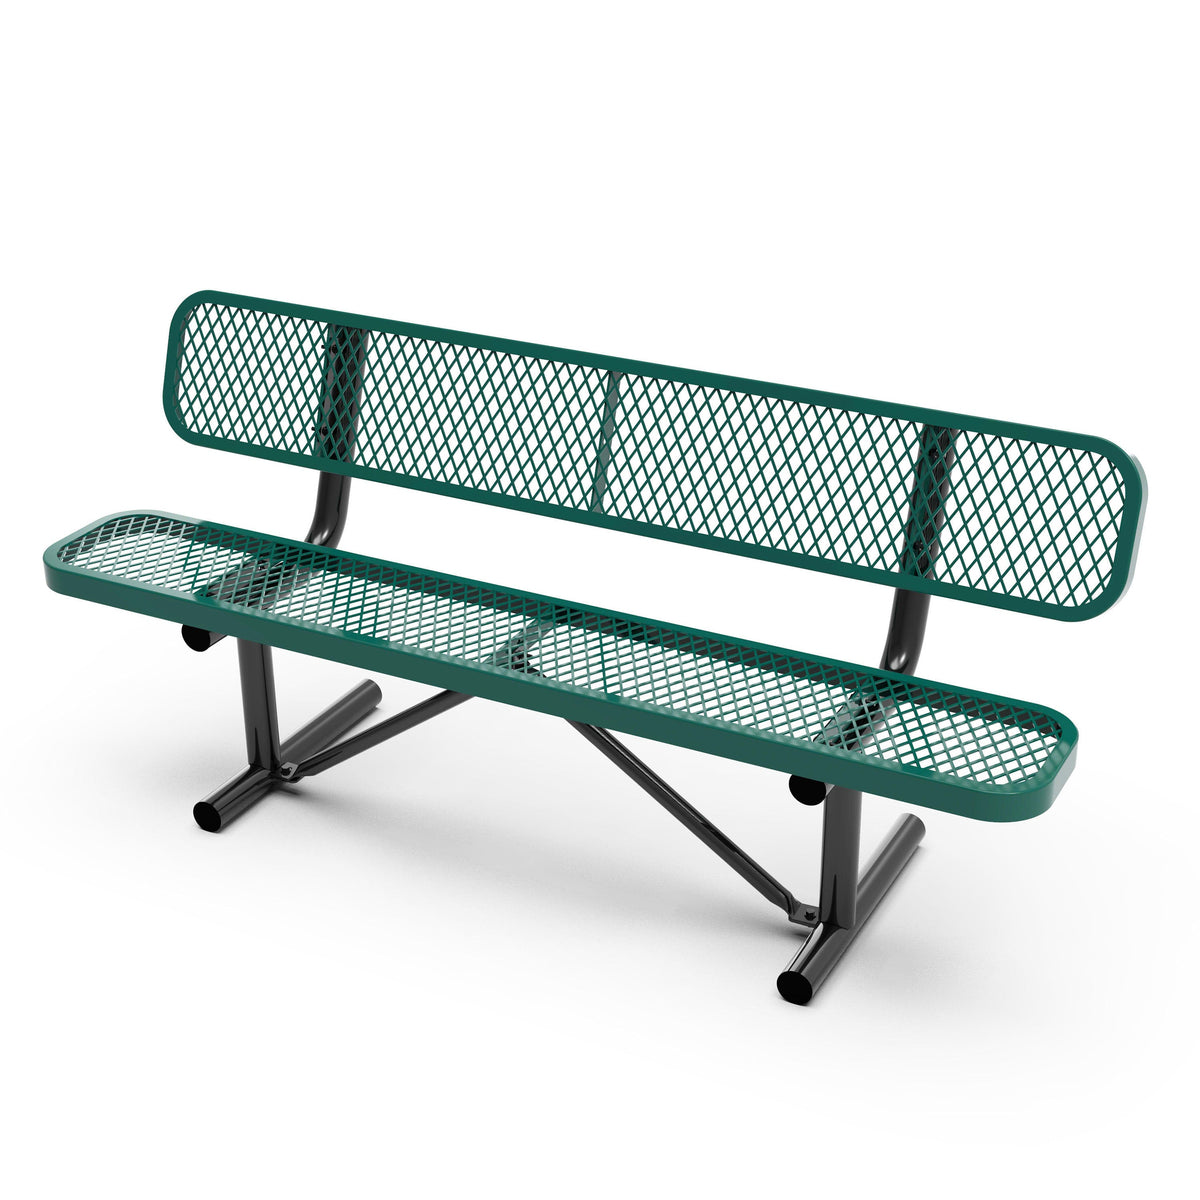 Green |#| Commercial Grade 6' Expanded Mesh Metal Outdoor Bench with Anchors in Green